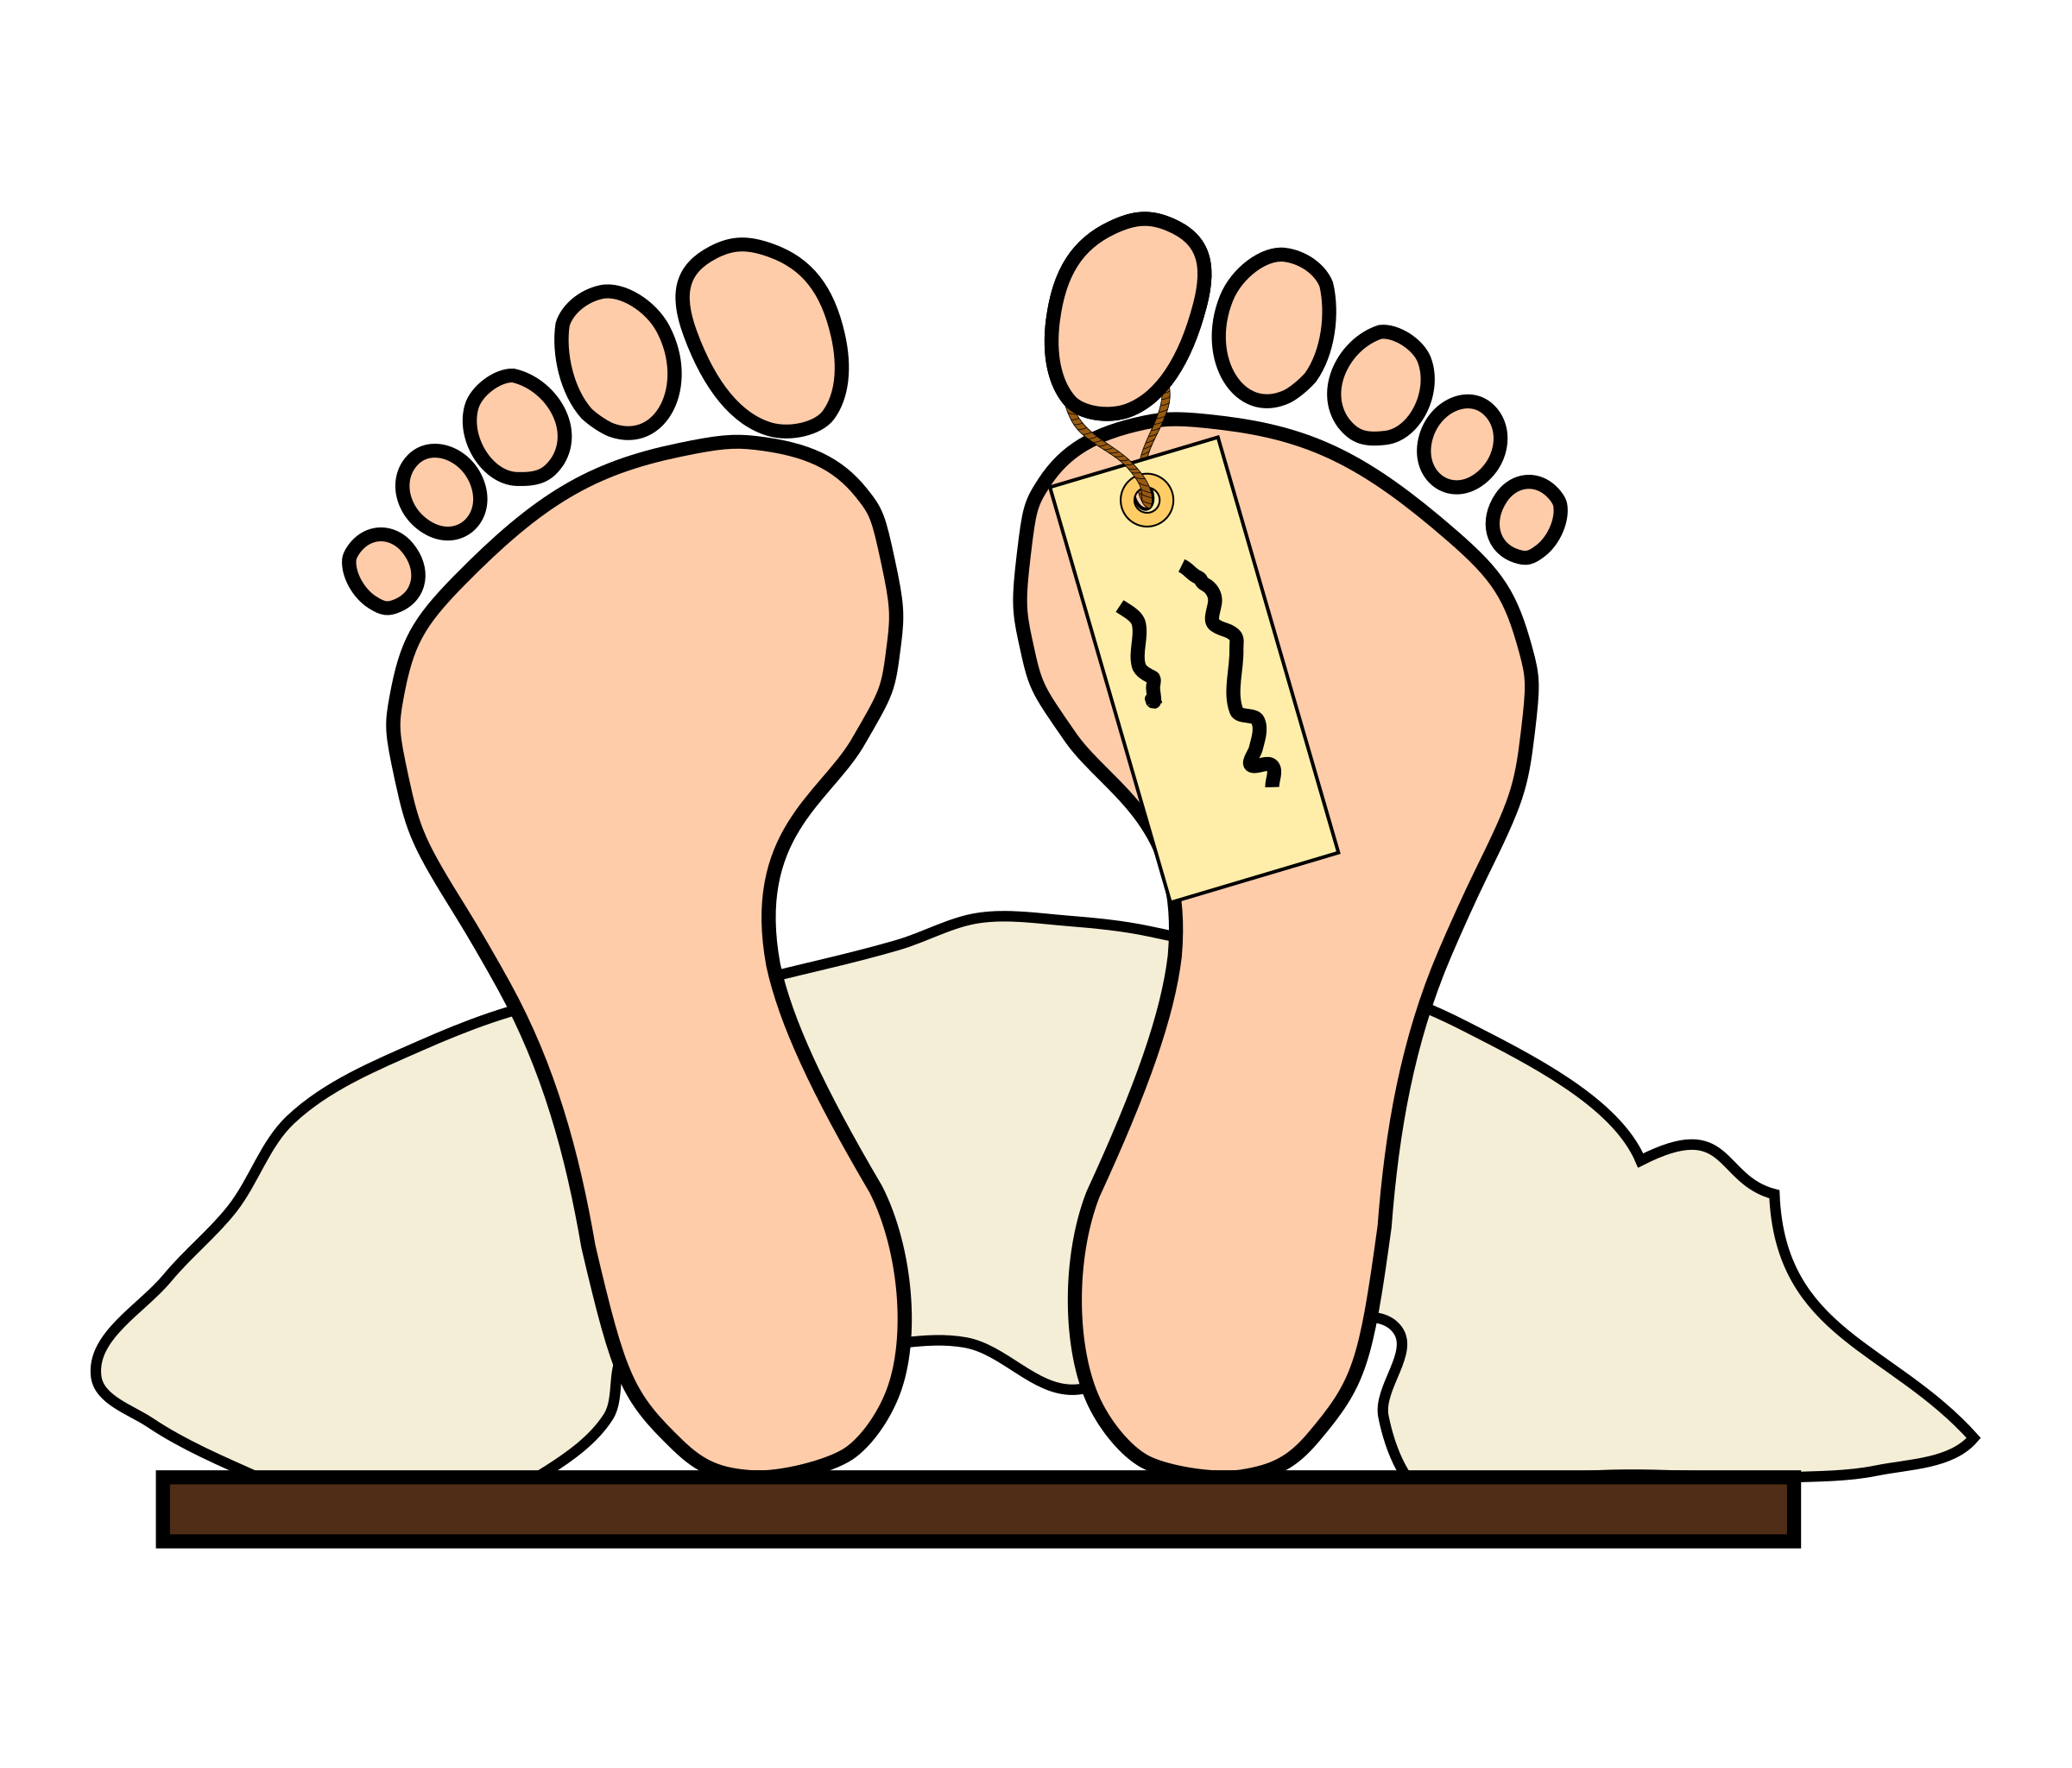 foot clipart body part